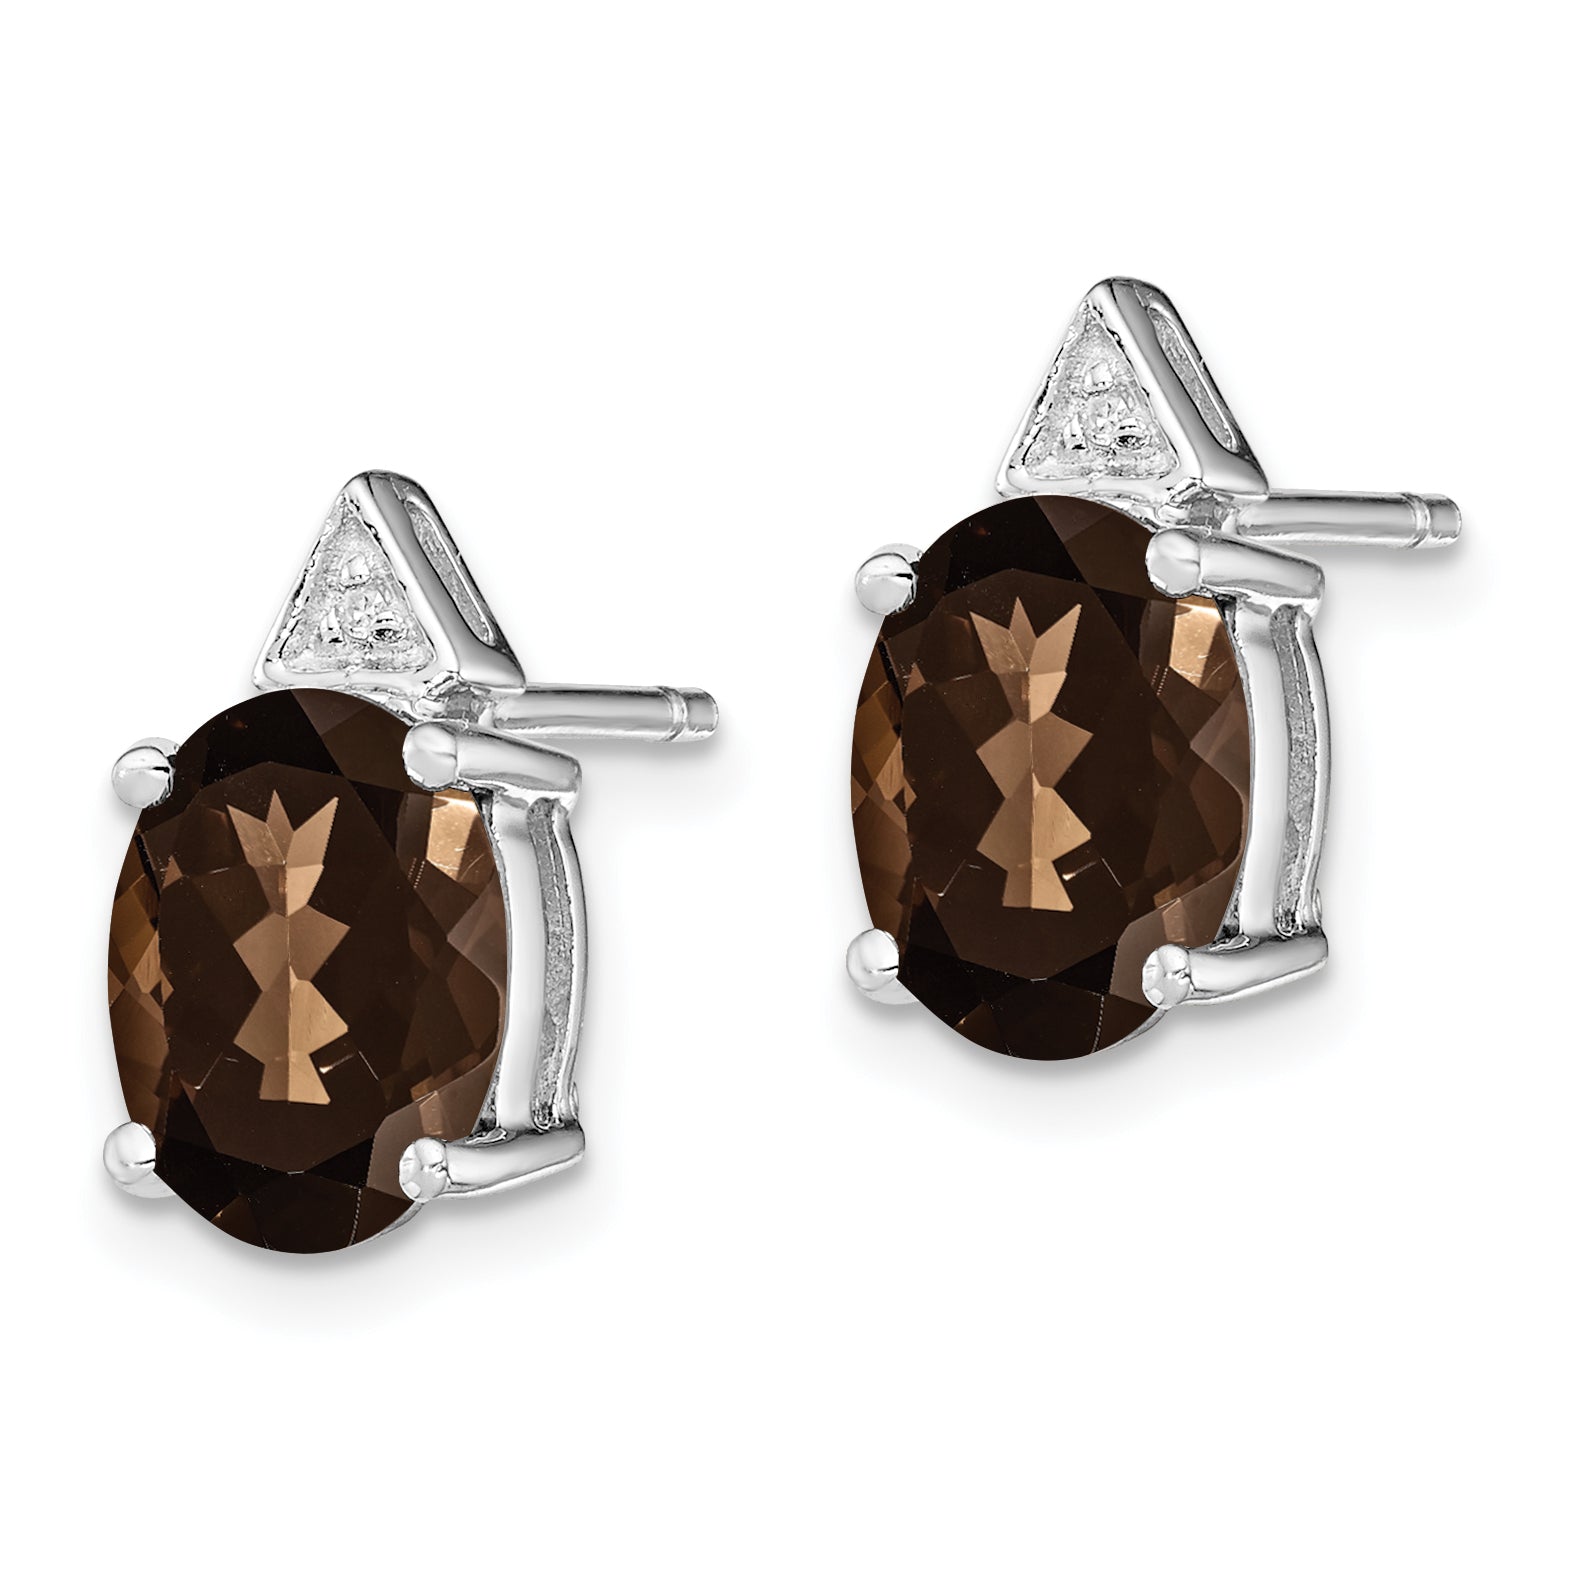 Sterling Silver Rhodium Plated Smoky Quartz and Diamond Post Earrings